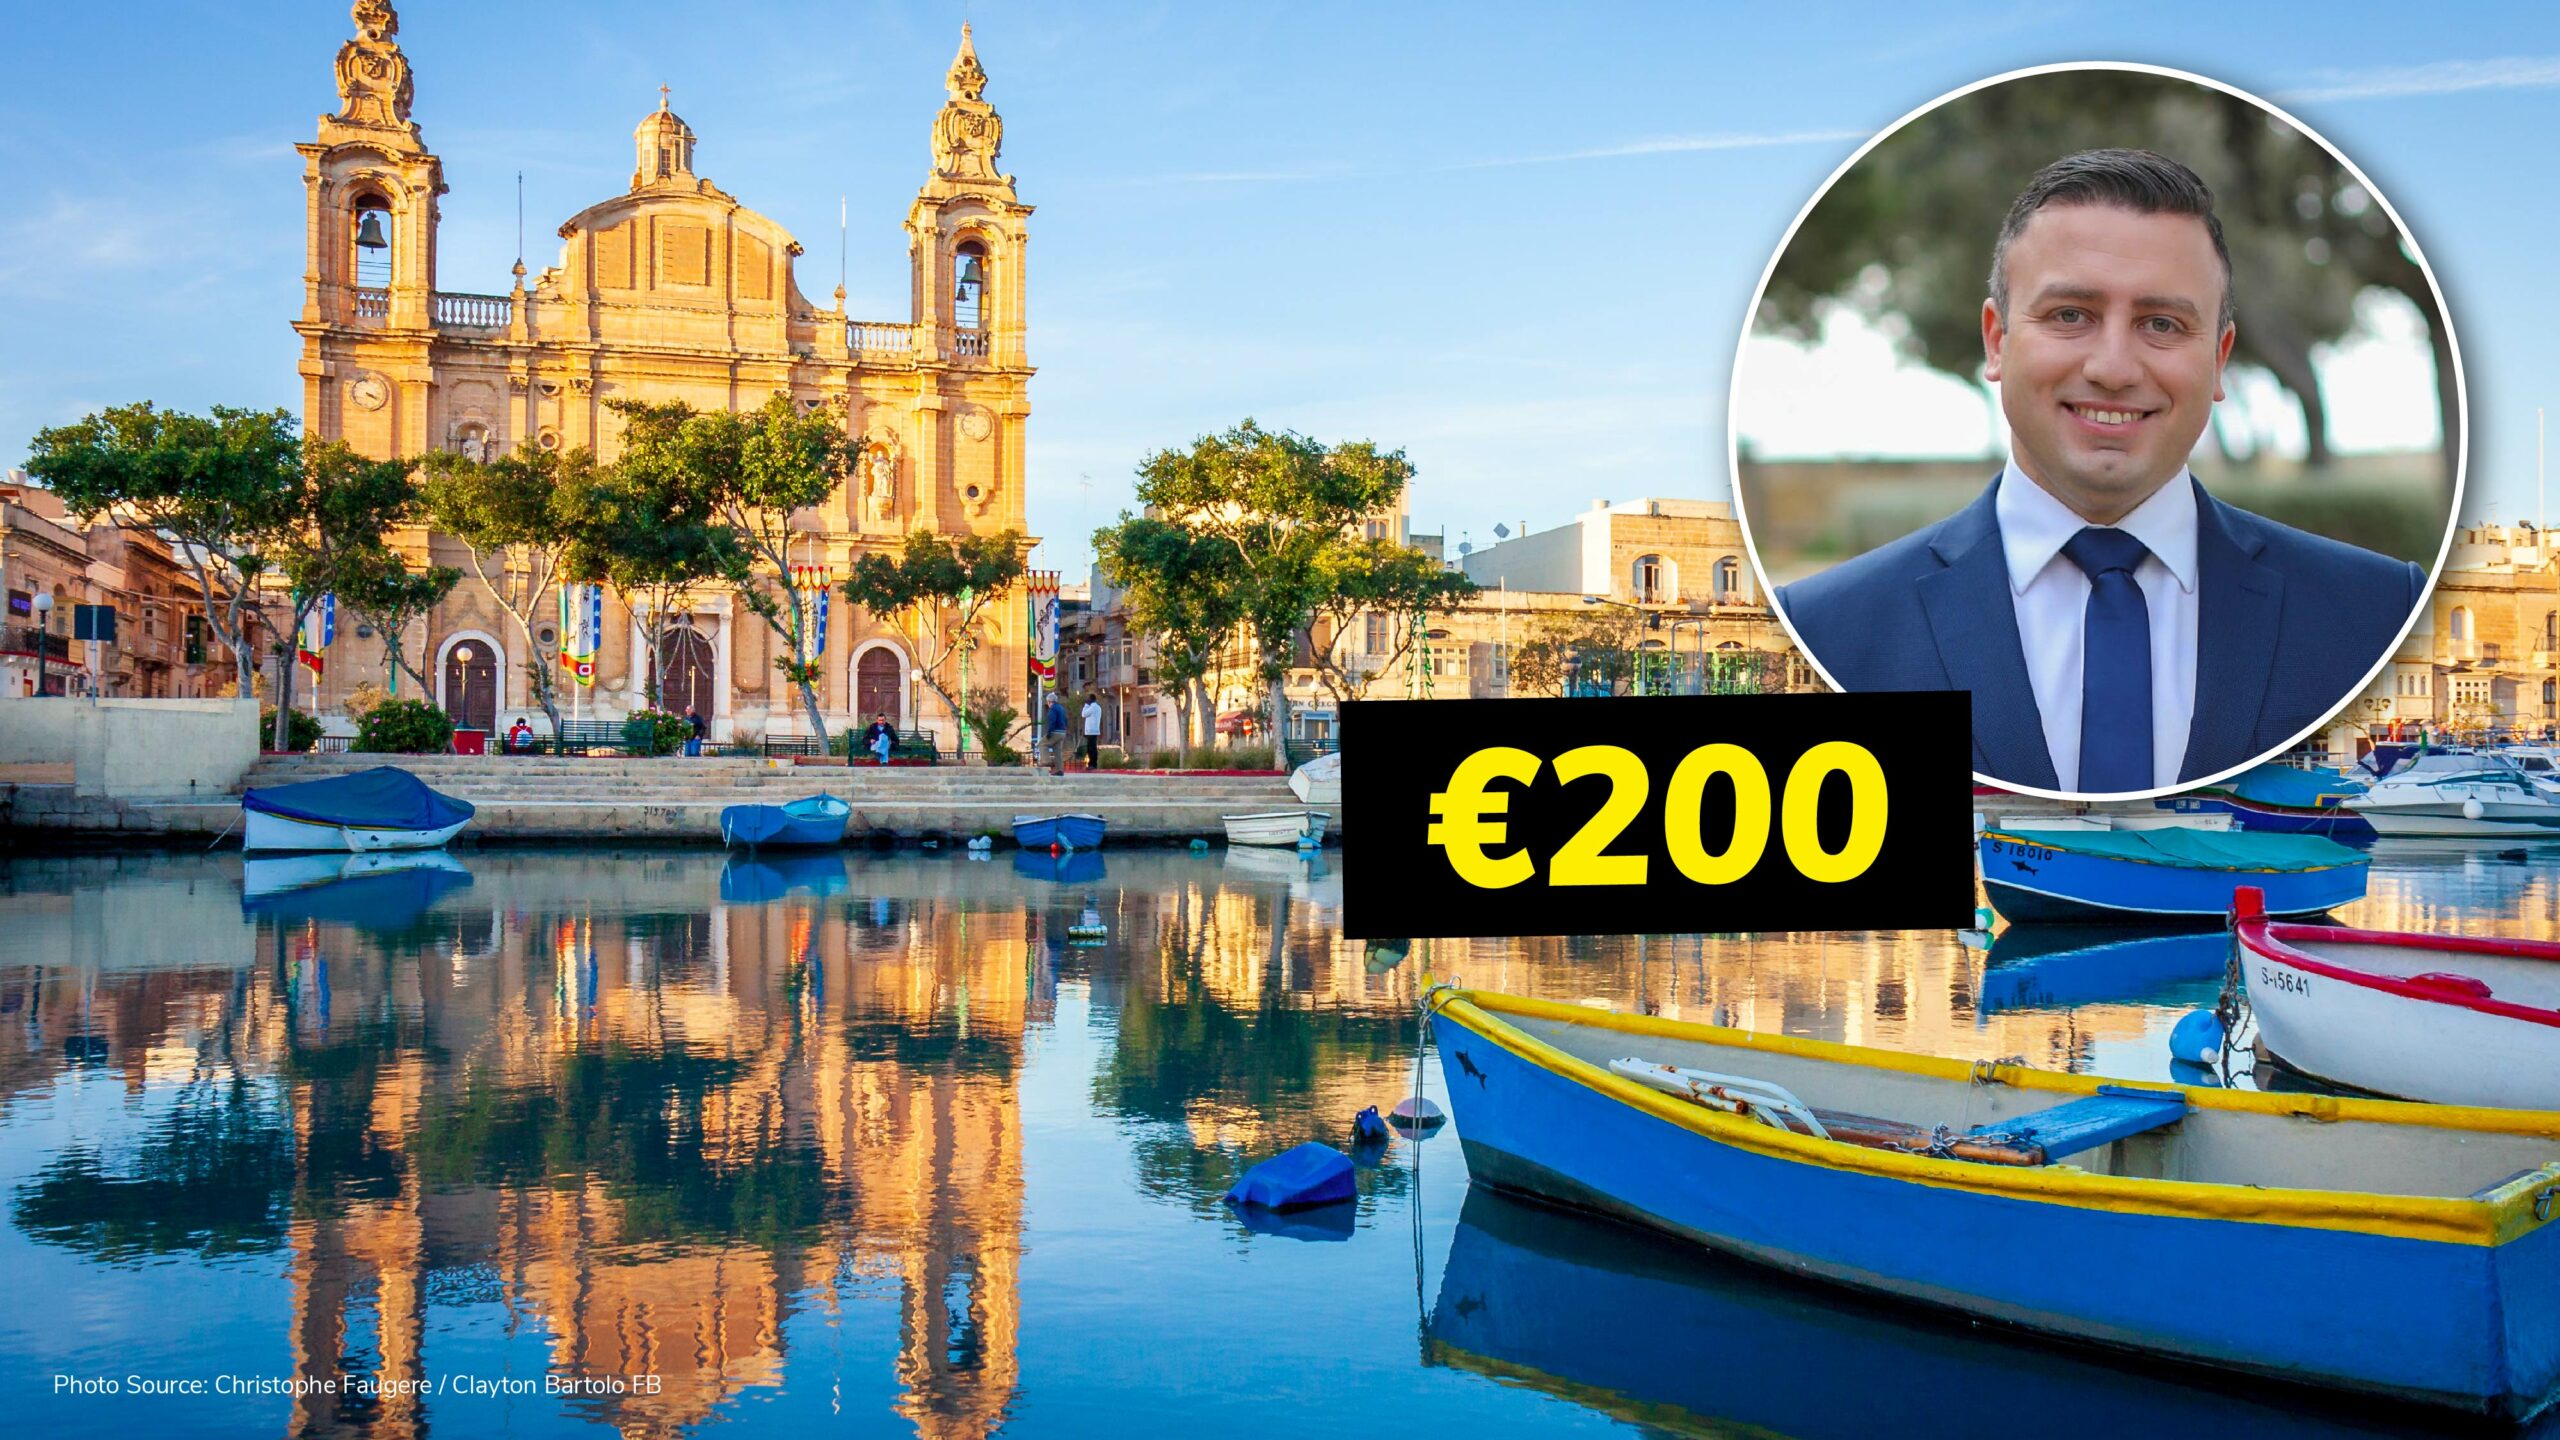 Tourists may earn up to €200 if they visit Maltese hotels as part of government scheme